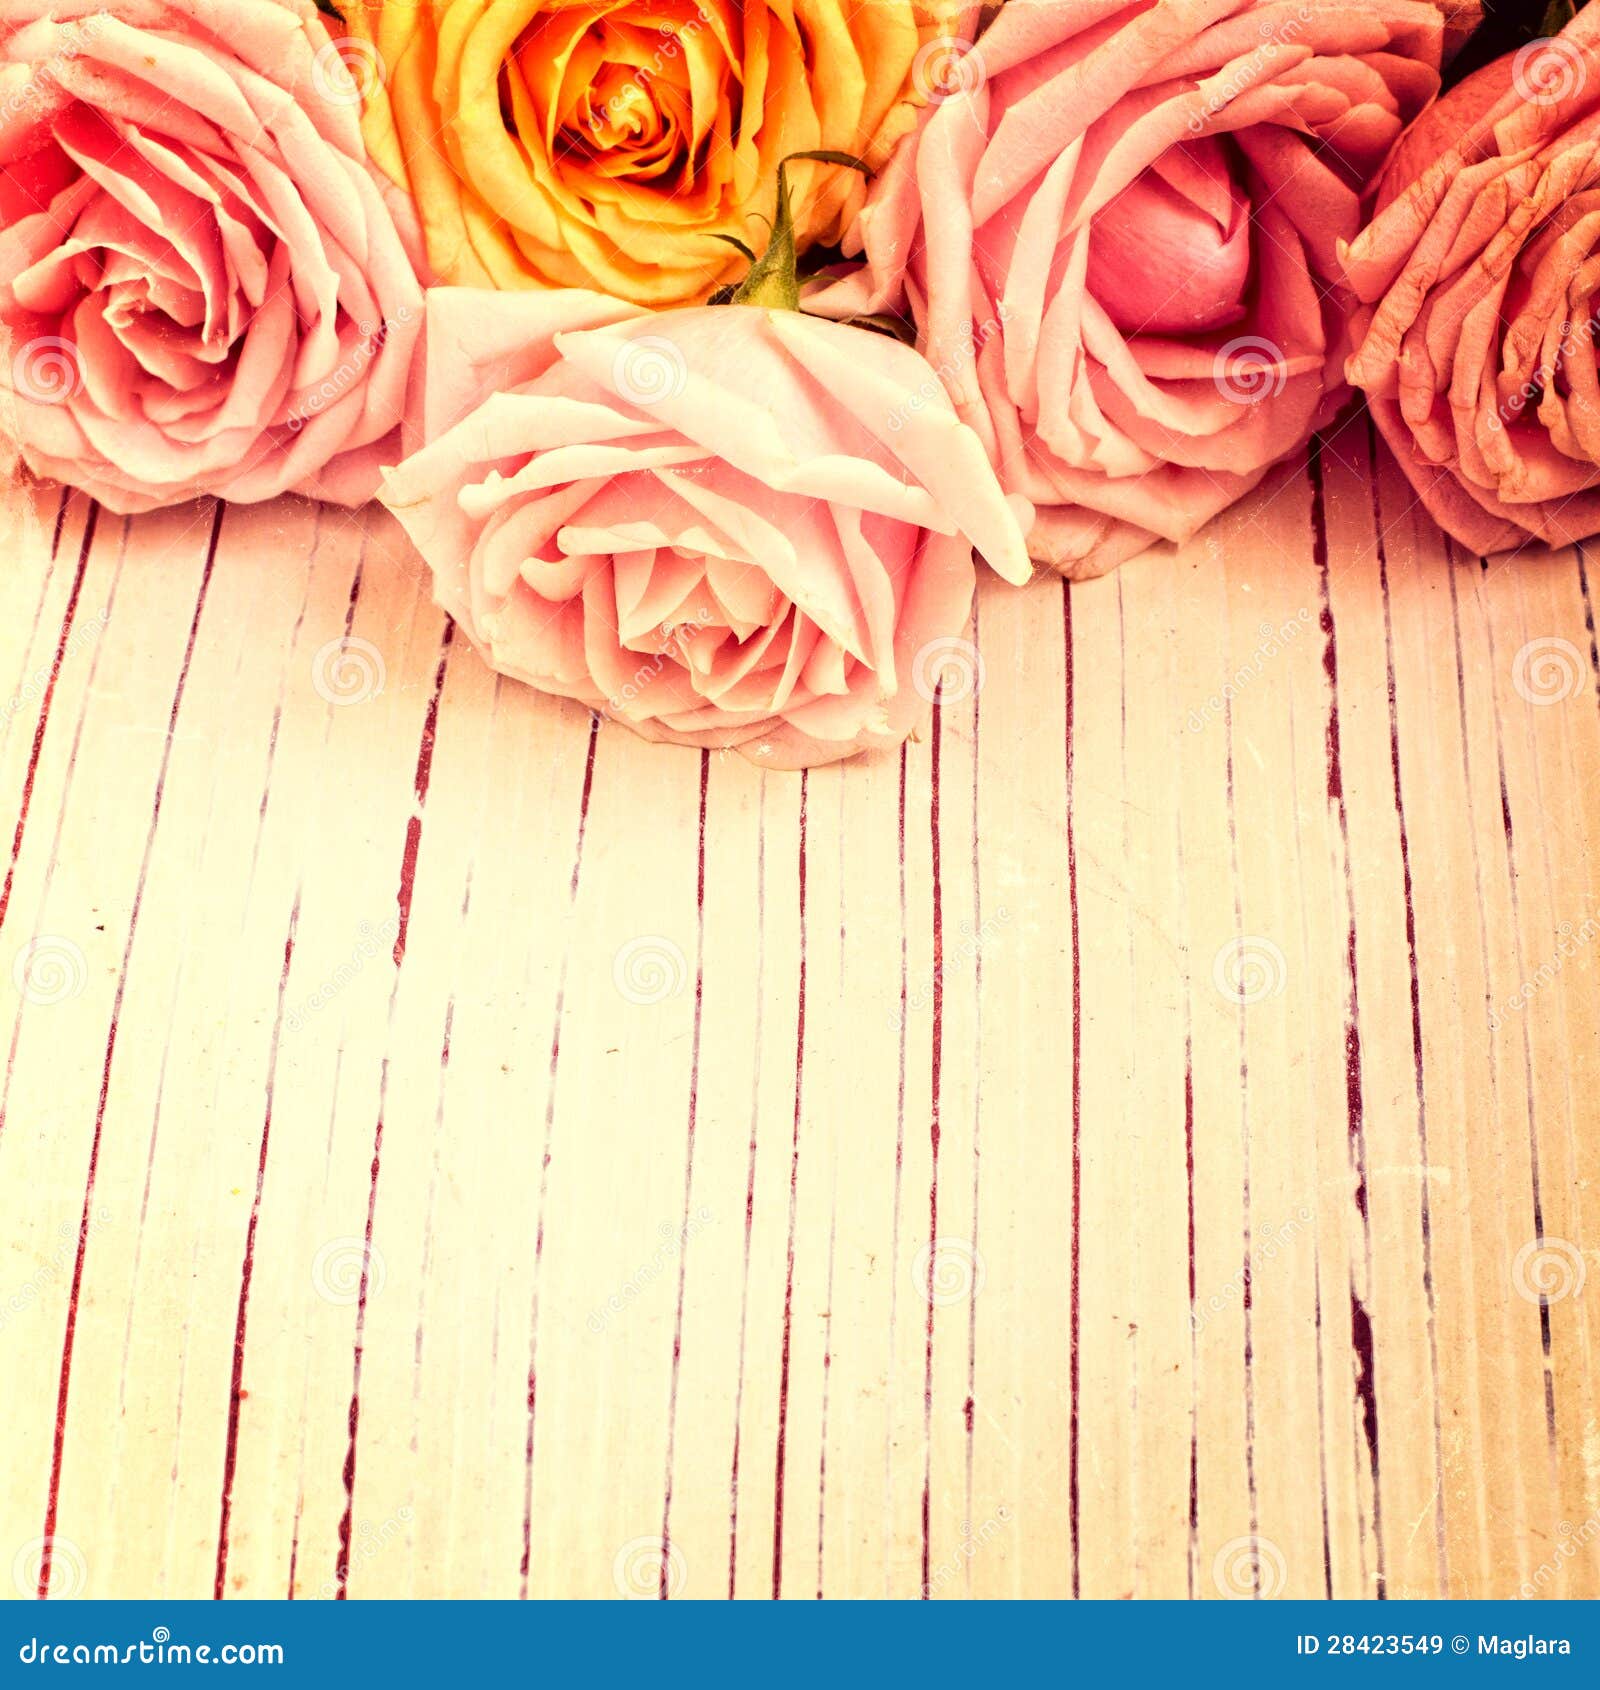  Background With Roses Royalty Free Stock Images - Image: 28423549